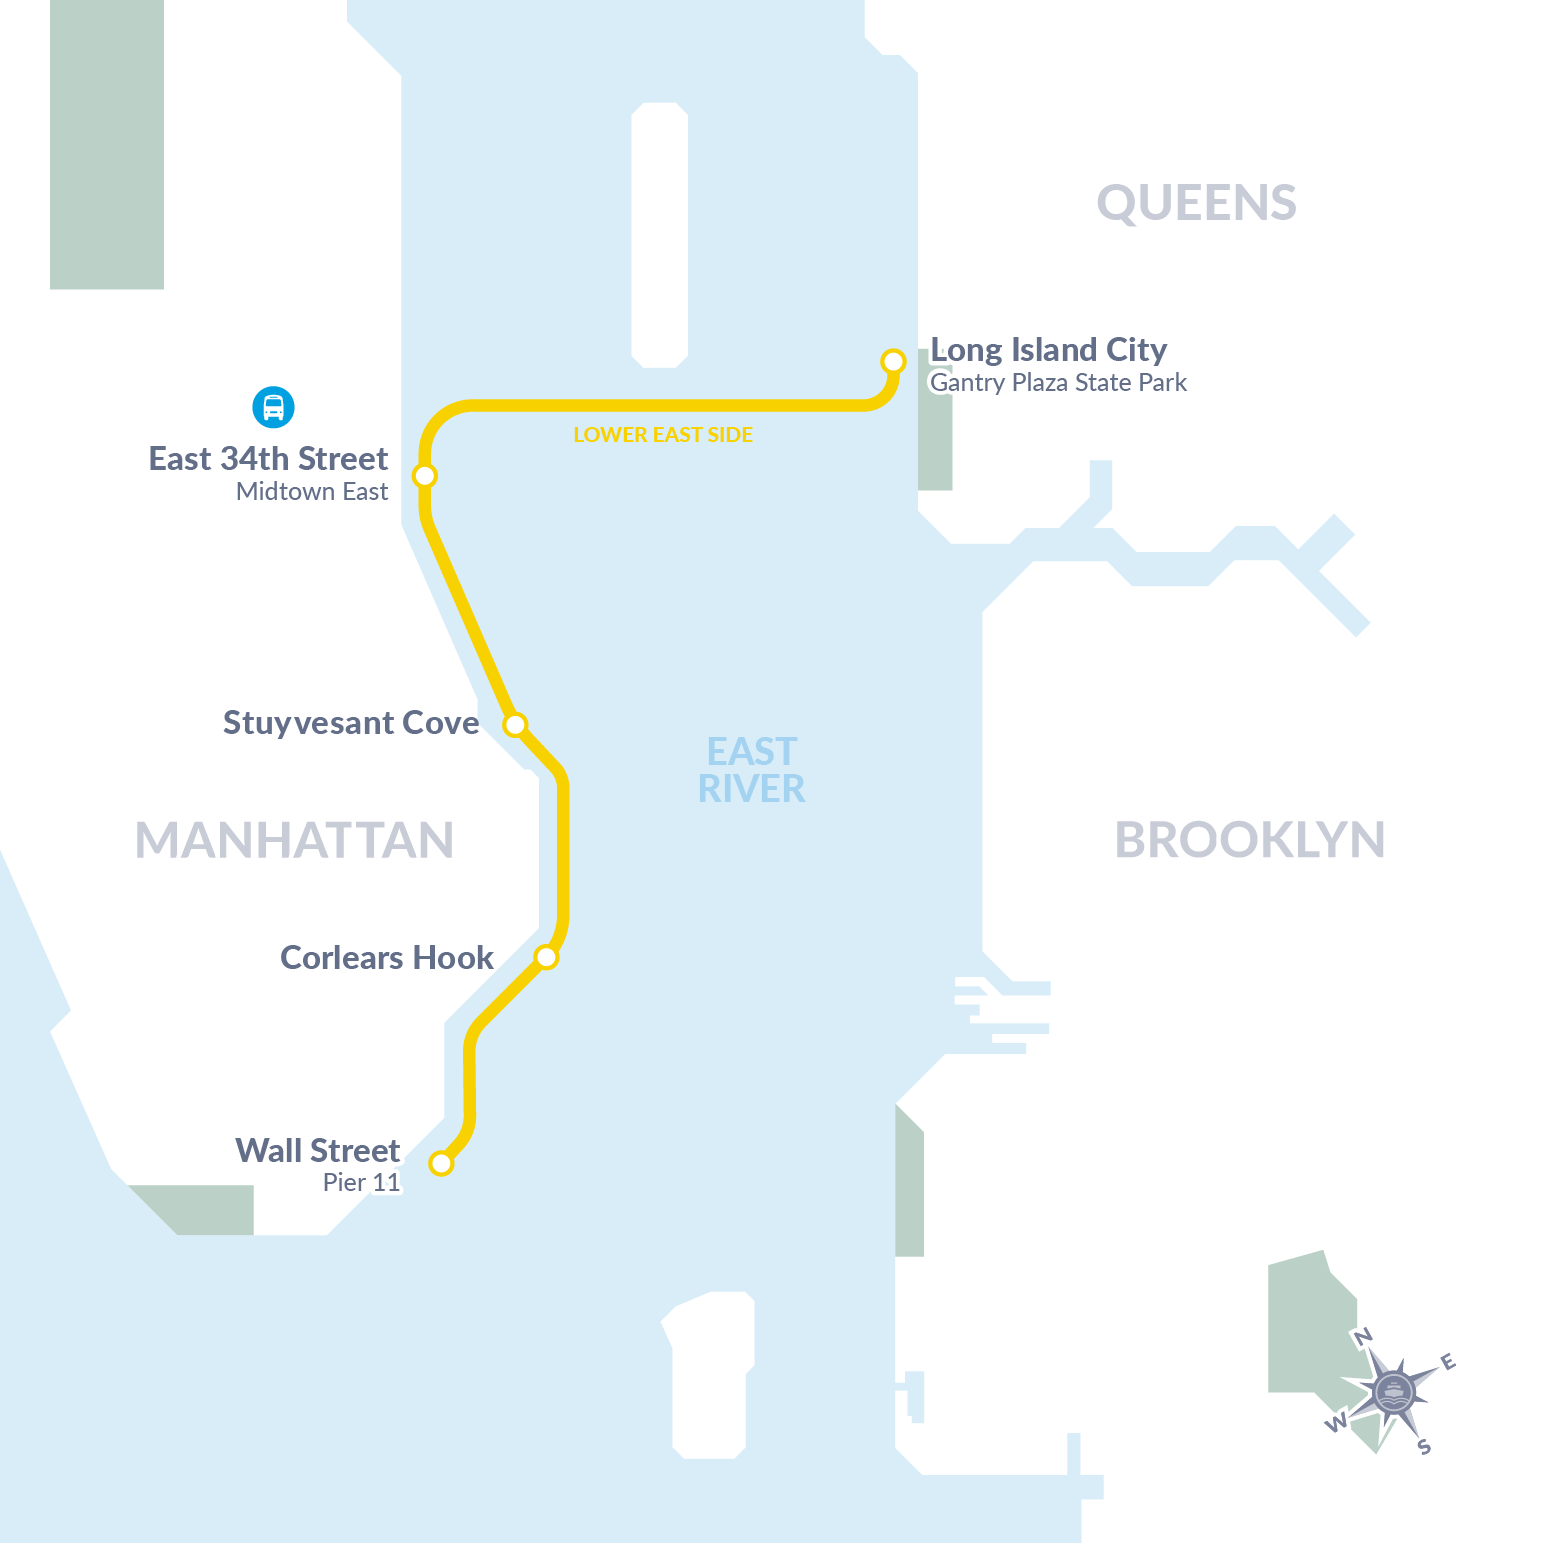 connects Long Island City, the Lower East Side and Lower Manhattan Route